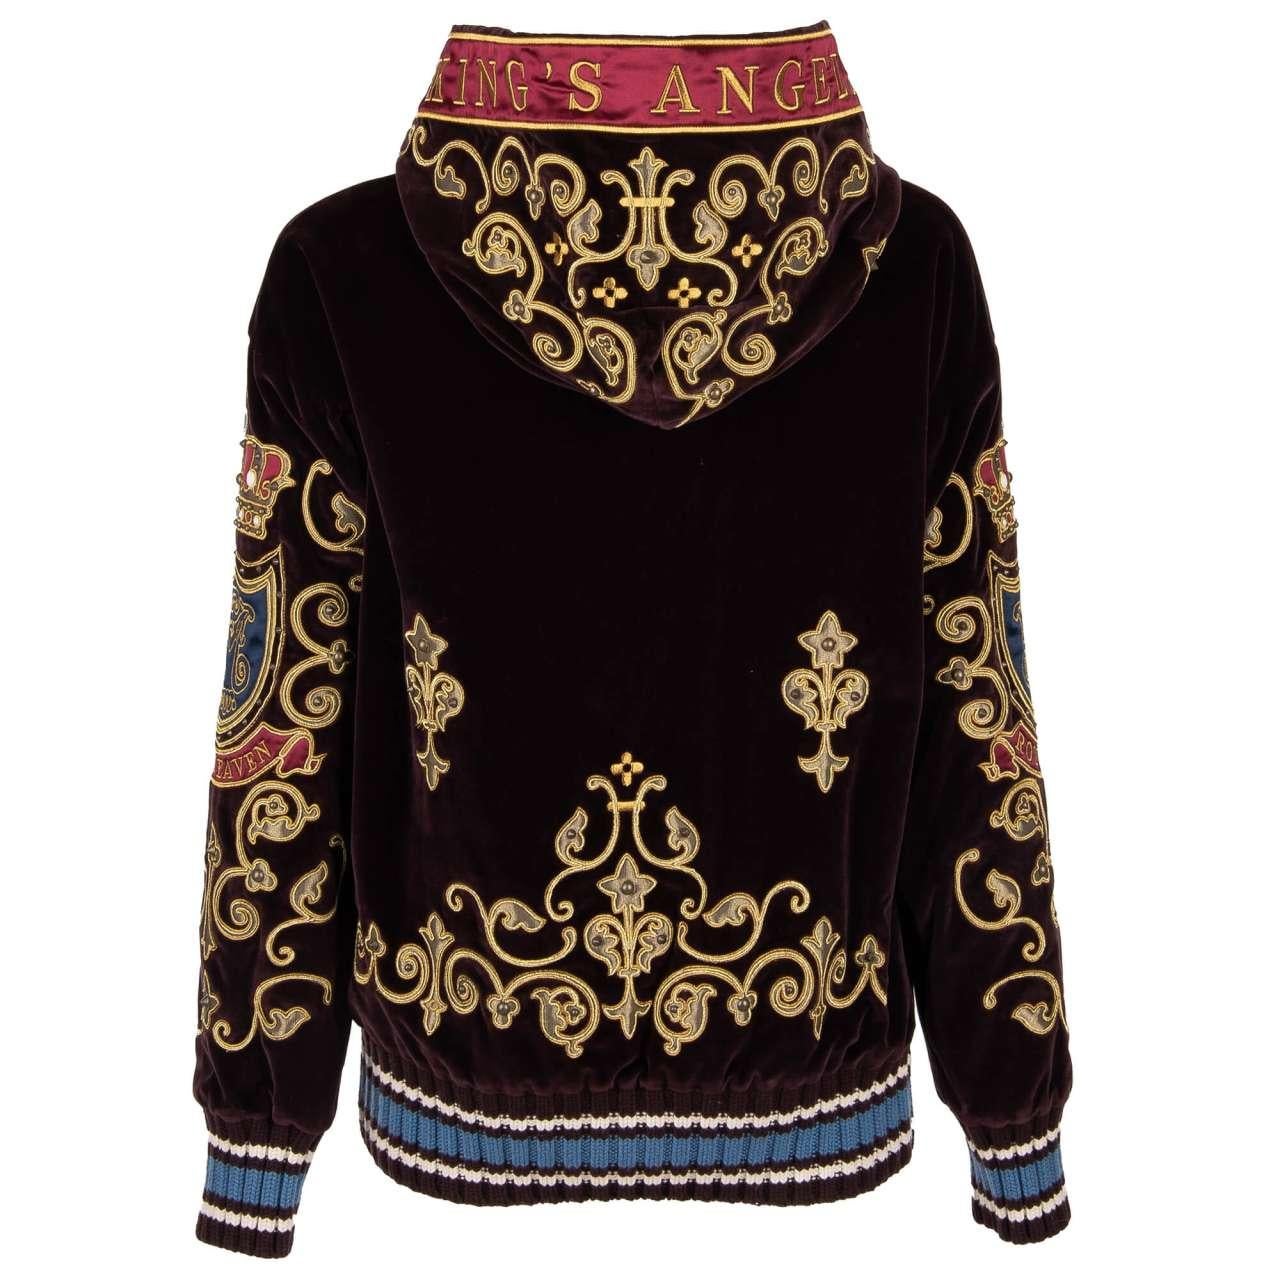 D&G Velvet Hoody Sweater with San Michele Crown King Embroidery Bordeaux Gold 50 In Excellent Condition For Sale In Erkrath, DE